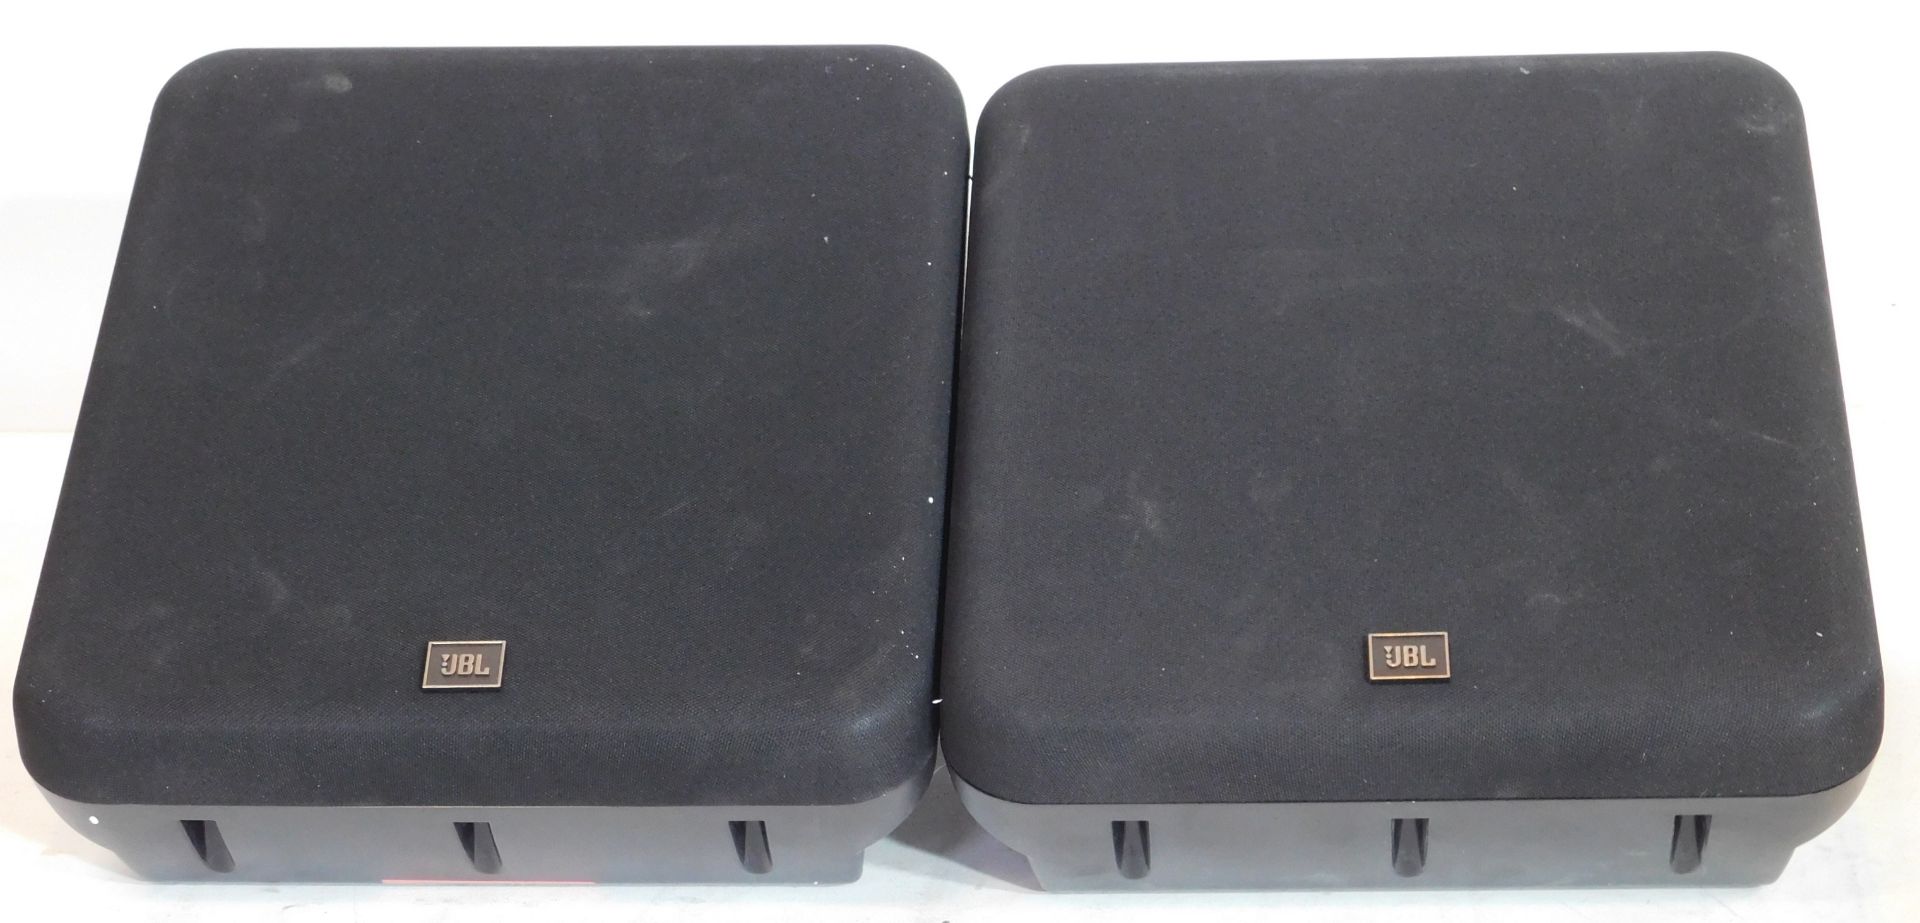 Pair of JBL Professional 8320 Surround-Sound Speakers (Location Brentwood. Please Refer to General